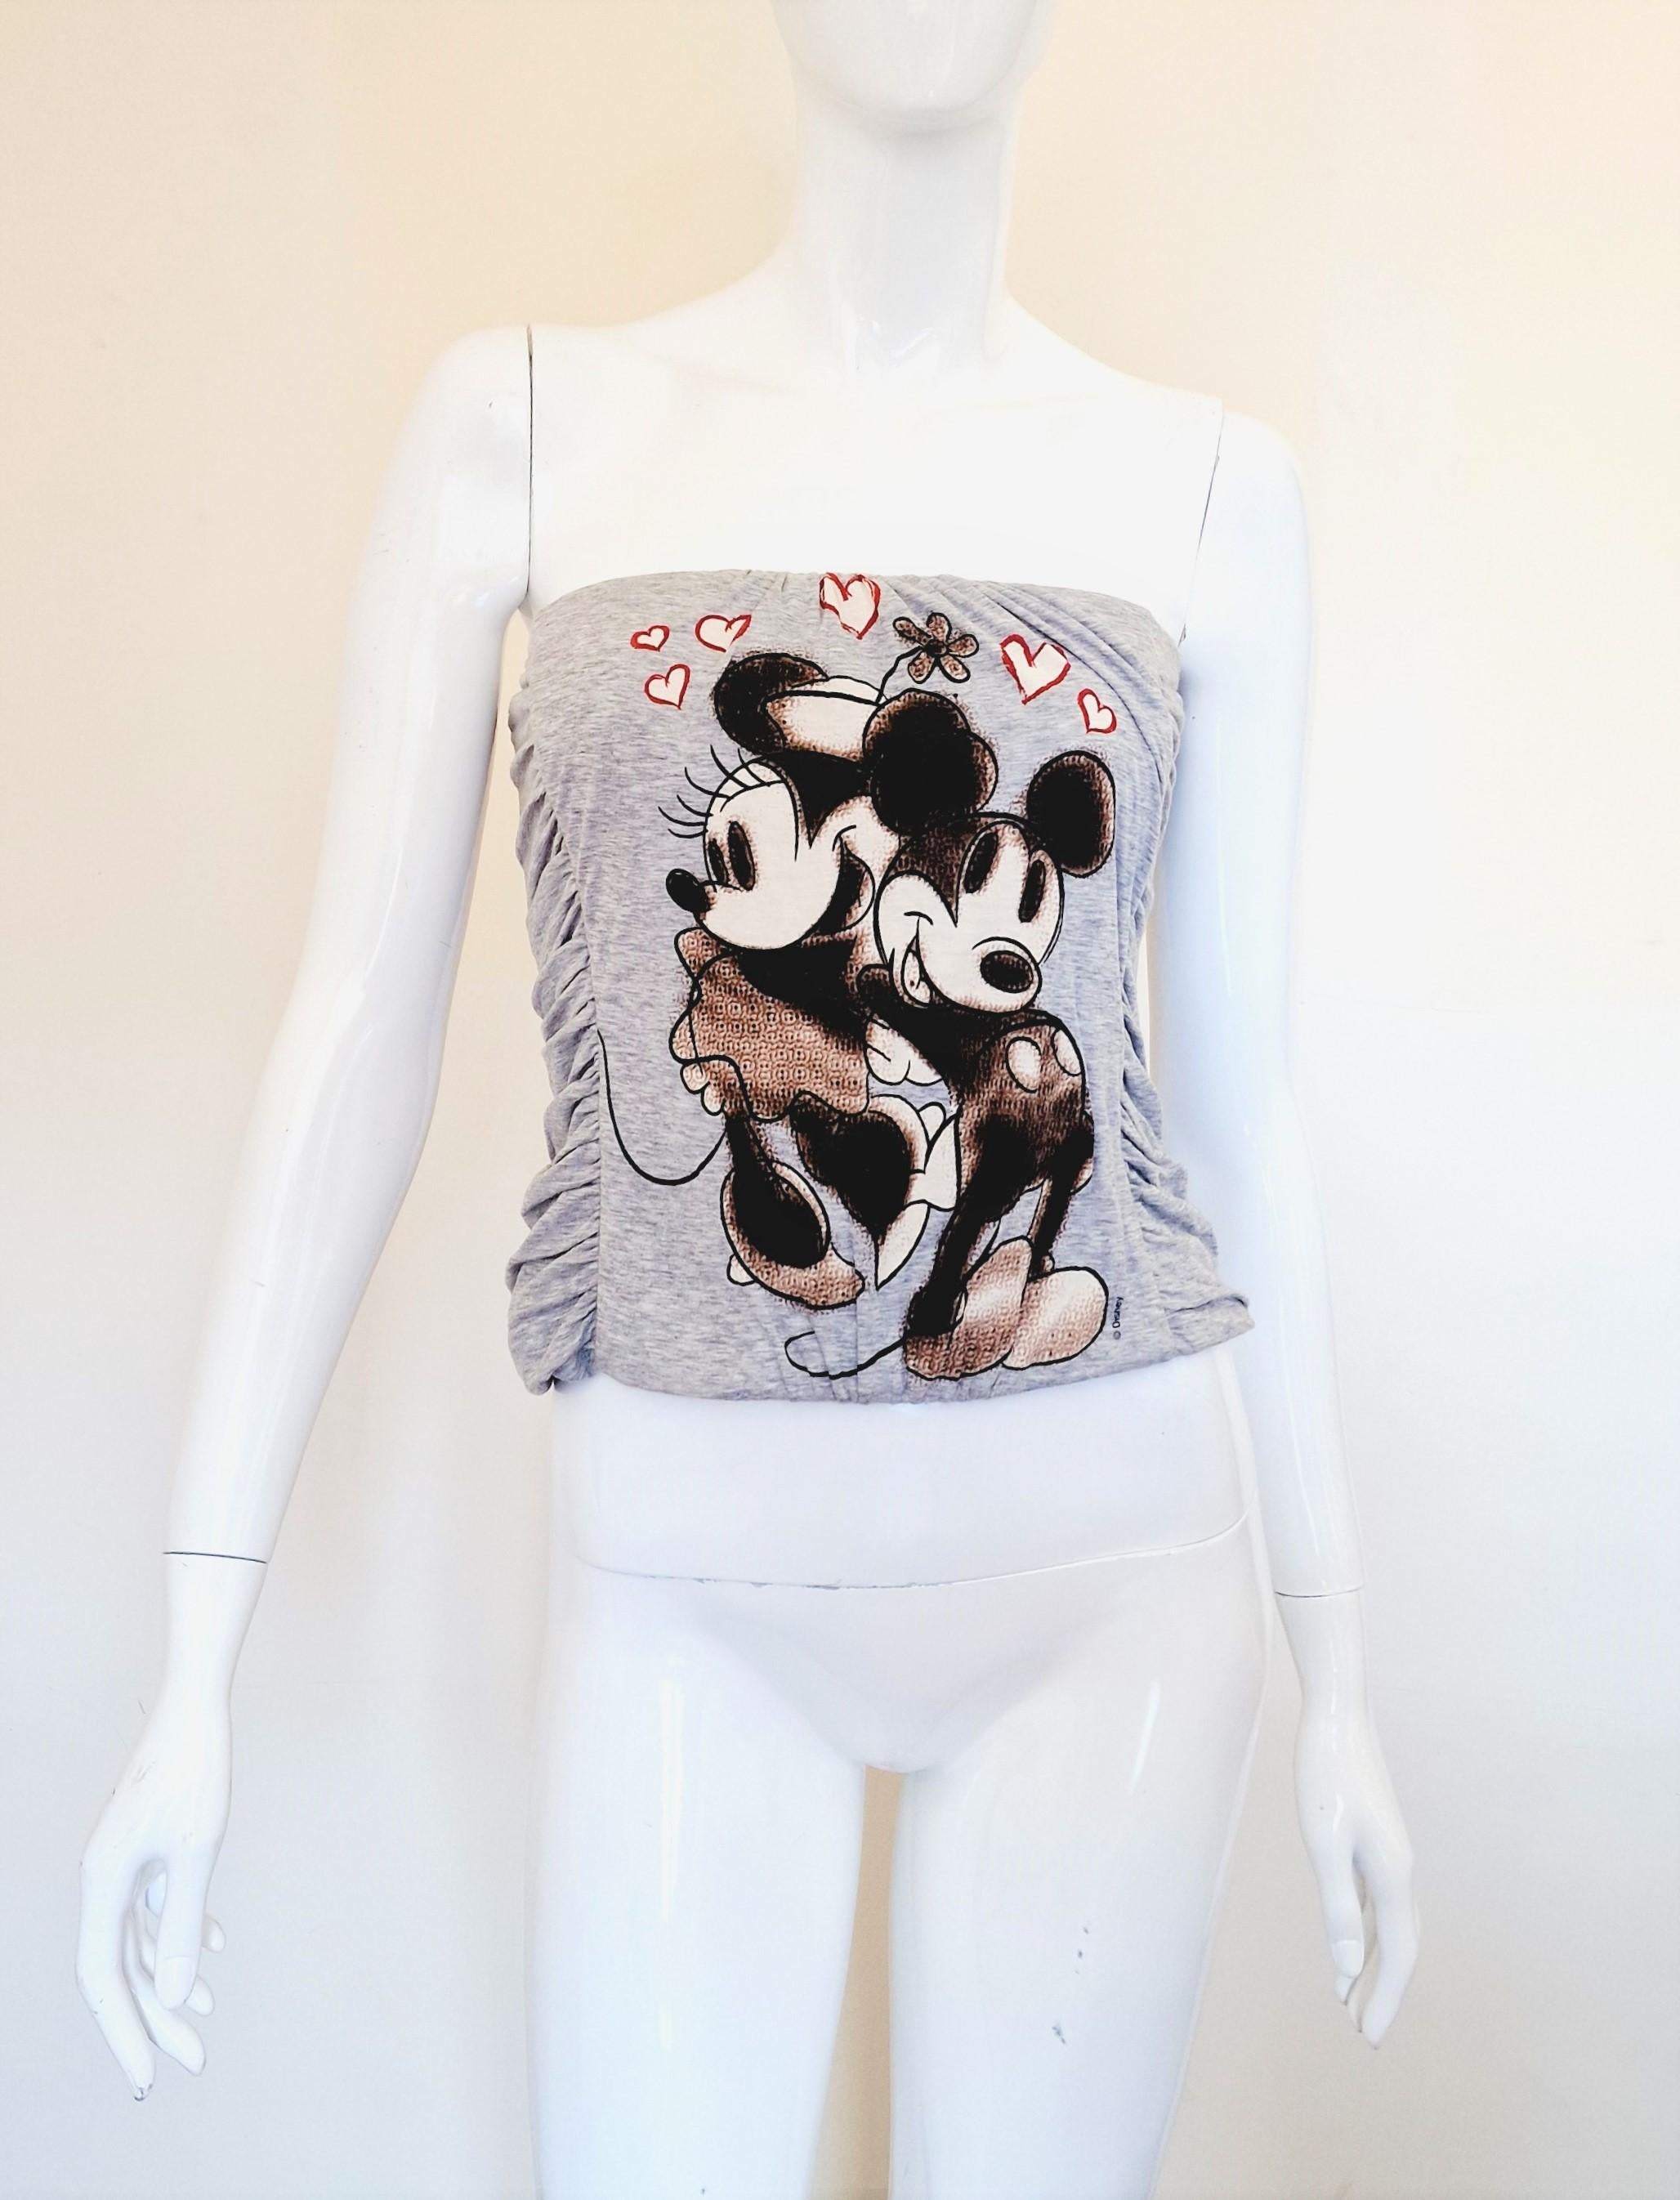 Rare Dolce and Gabbana Minnie & Mickey Mouse boned corset!
From the Womens Fall Winter 2004/2005 collection!

EXCELLENT condition!

SIZE
Fits from size small to medium. Stretchy!
Marked size: IT40.
Please, check the measurements:
Length: 32 cm /